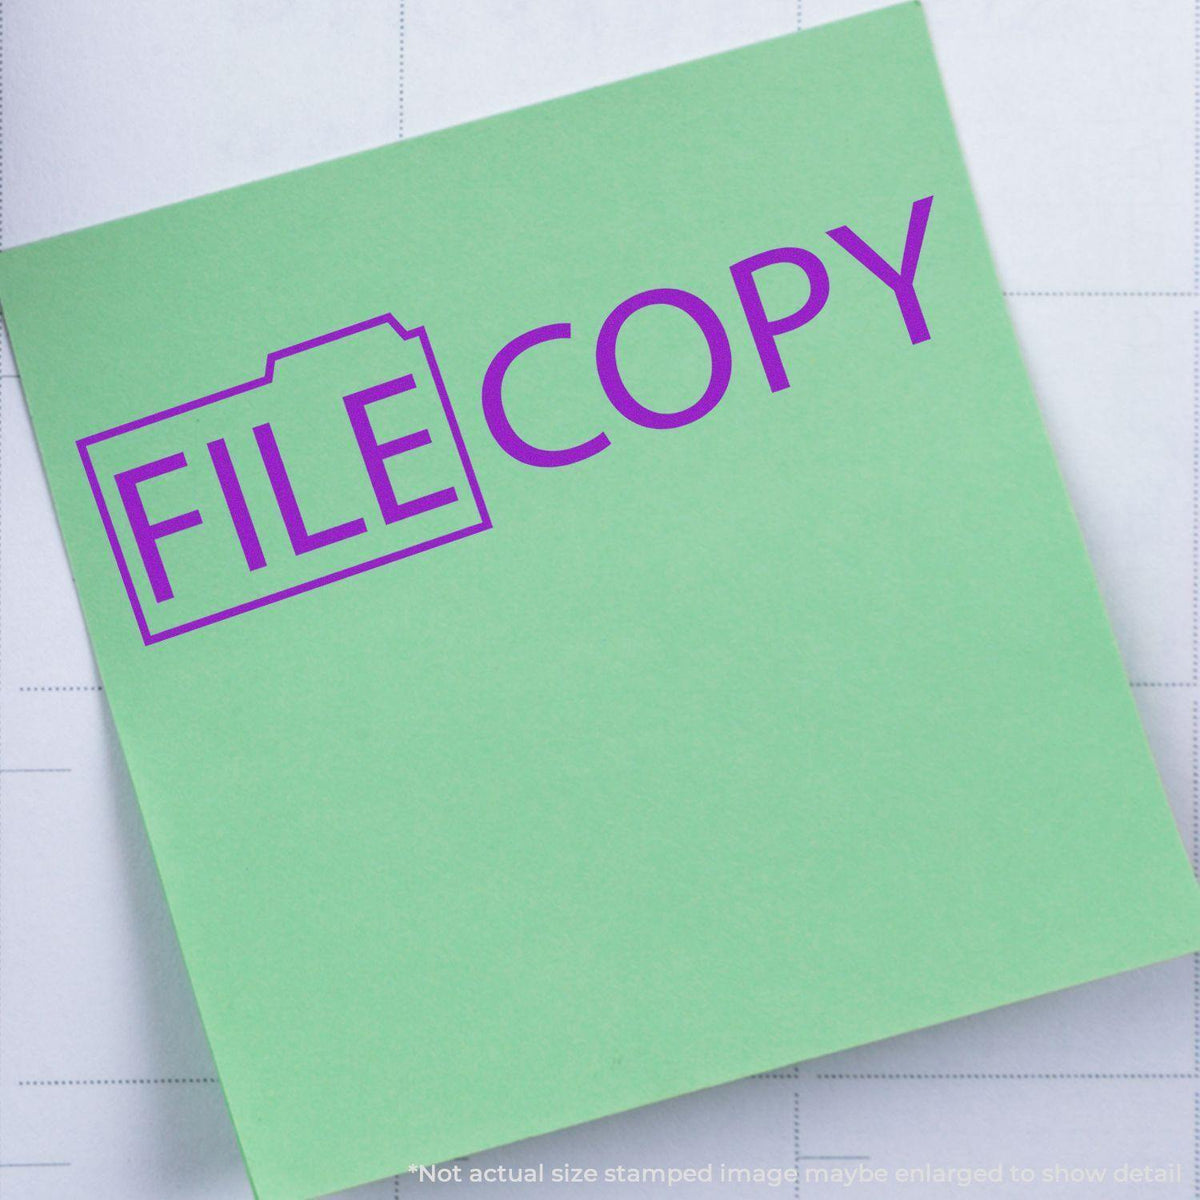 In Use Large File Copy with Folder Rubber Stamp Image